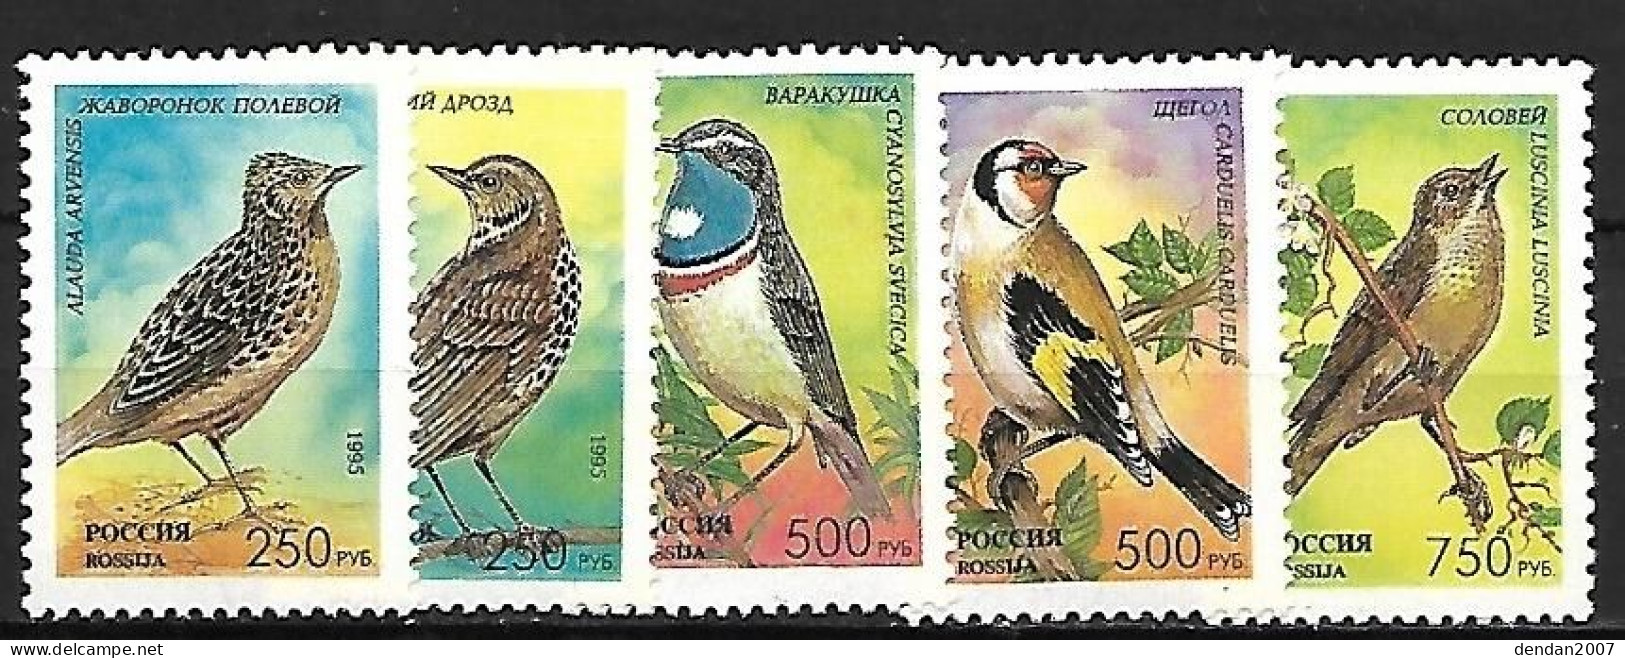 Russia - 1995 Complete Set 5/5 : 5 Different Songbirds - Songbirds & Tree Dwellers